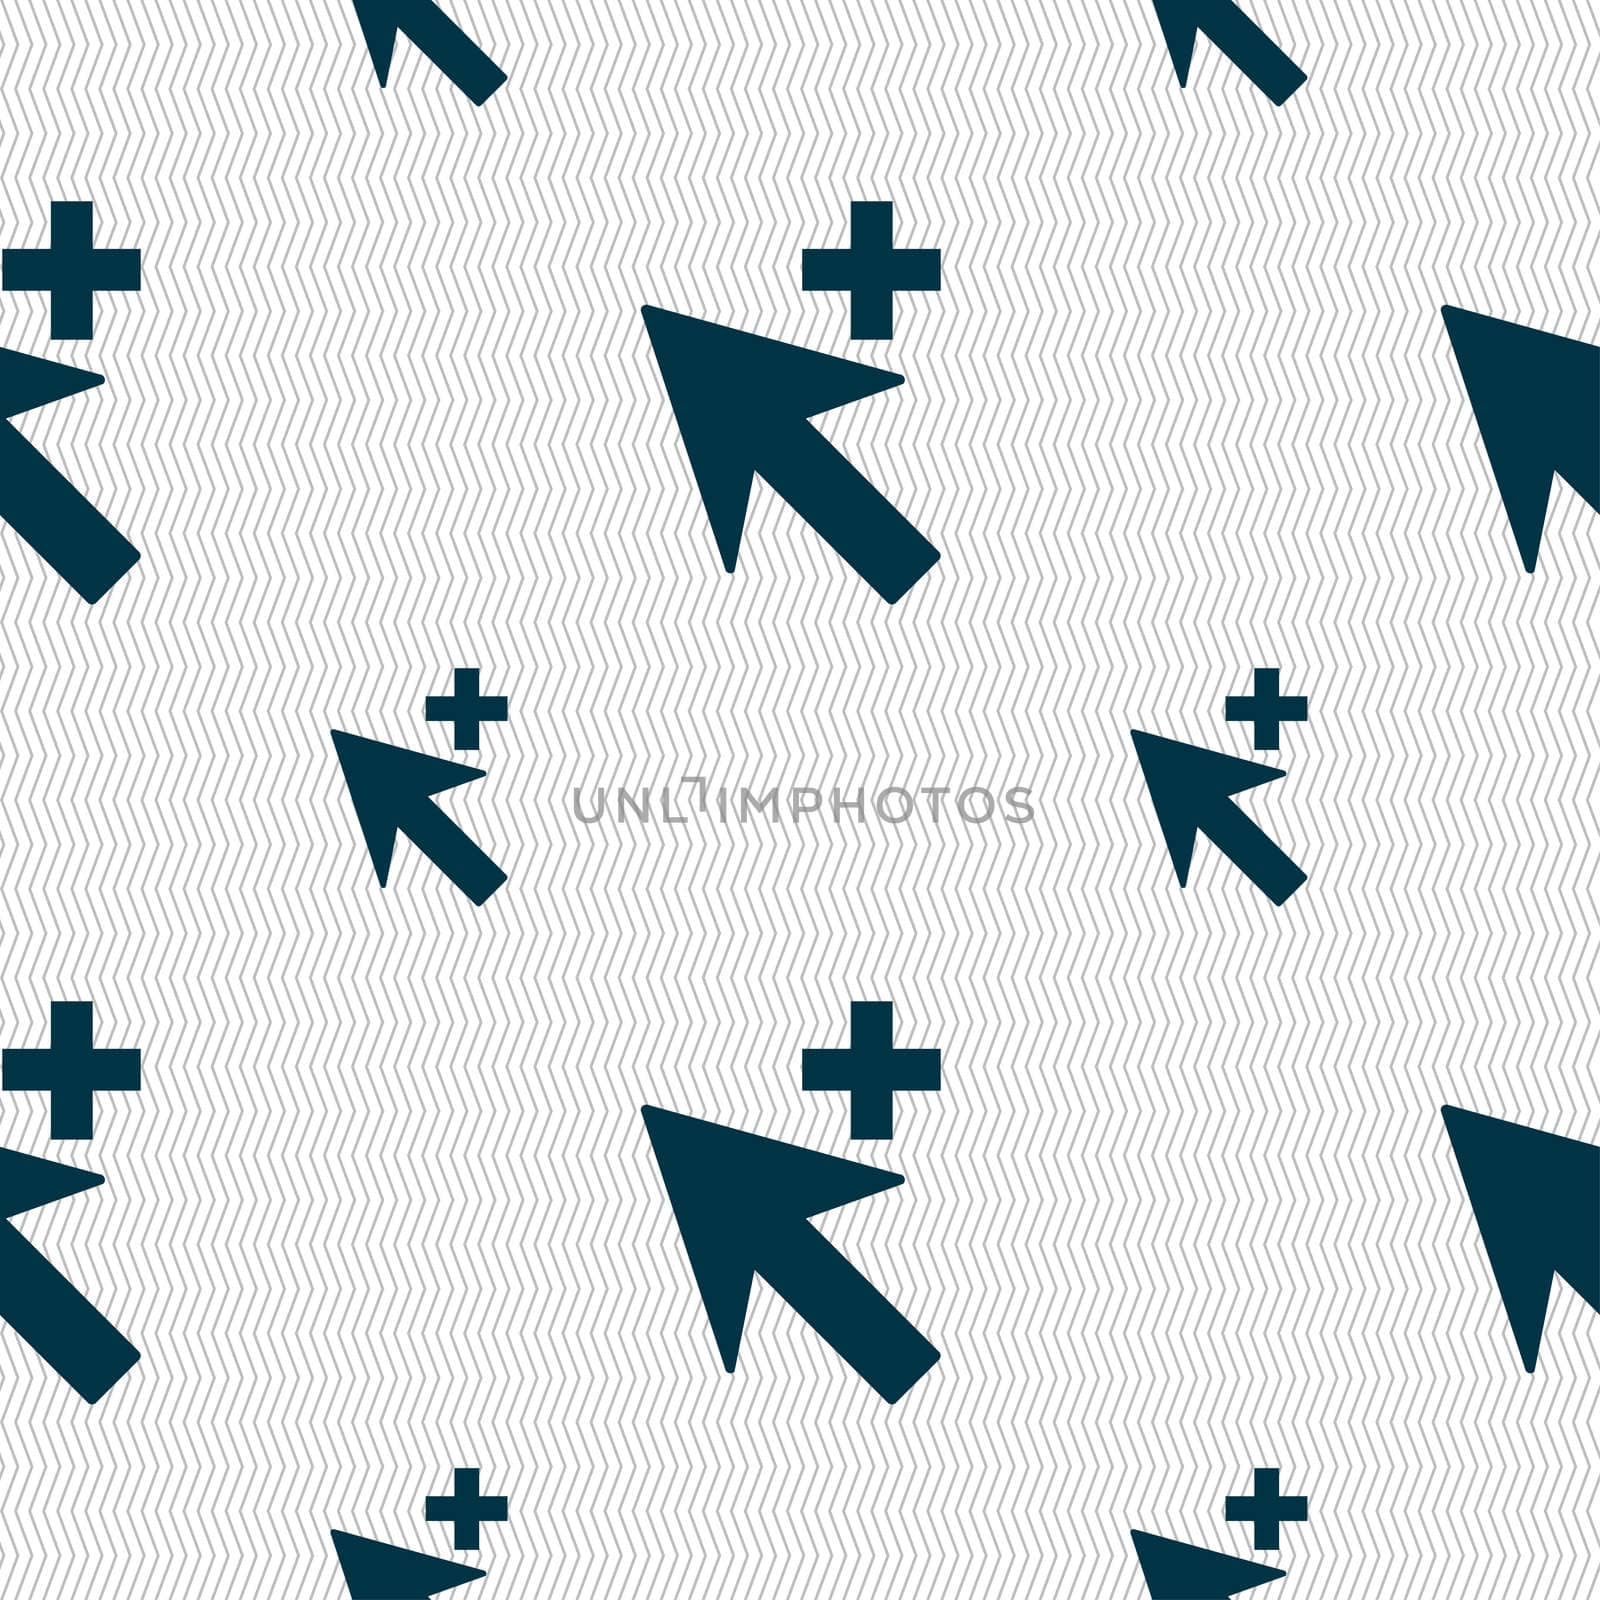 Cursor, arrow plus, add icon sign. Seamless pattern with geometric texture. illustration